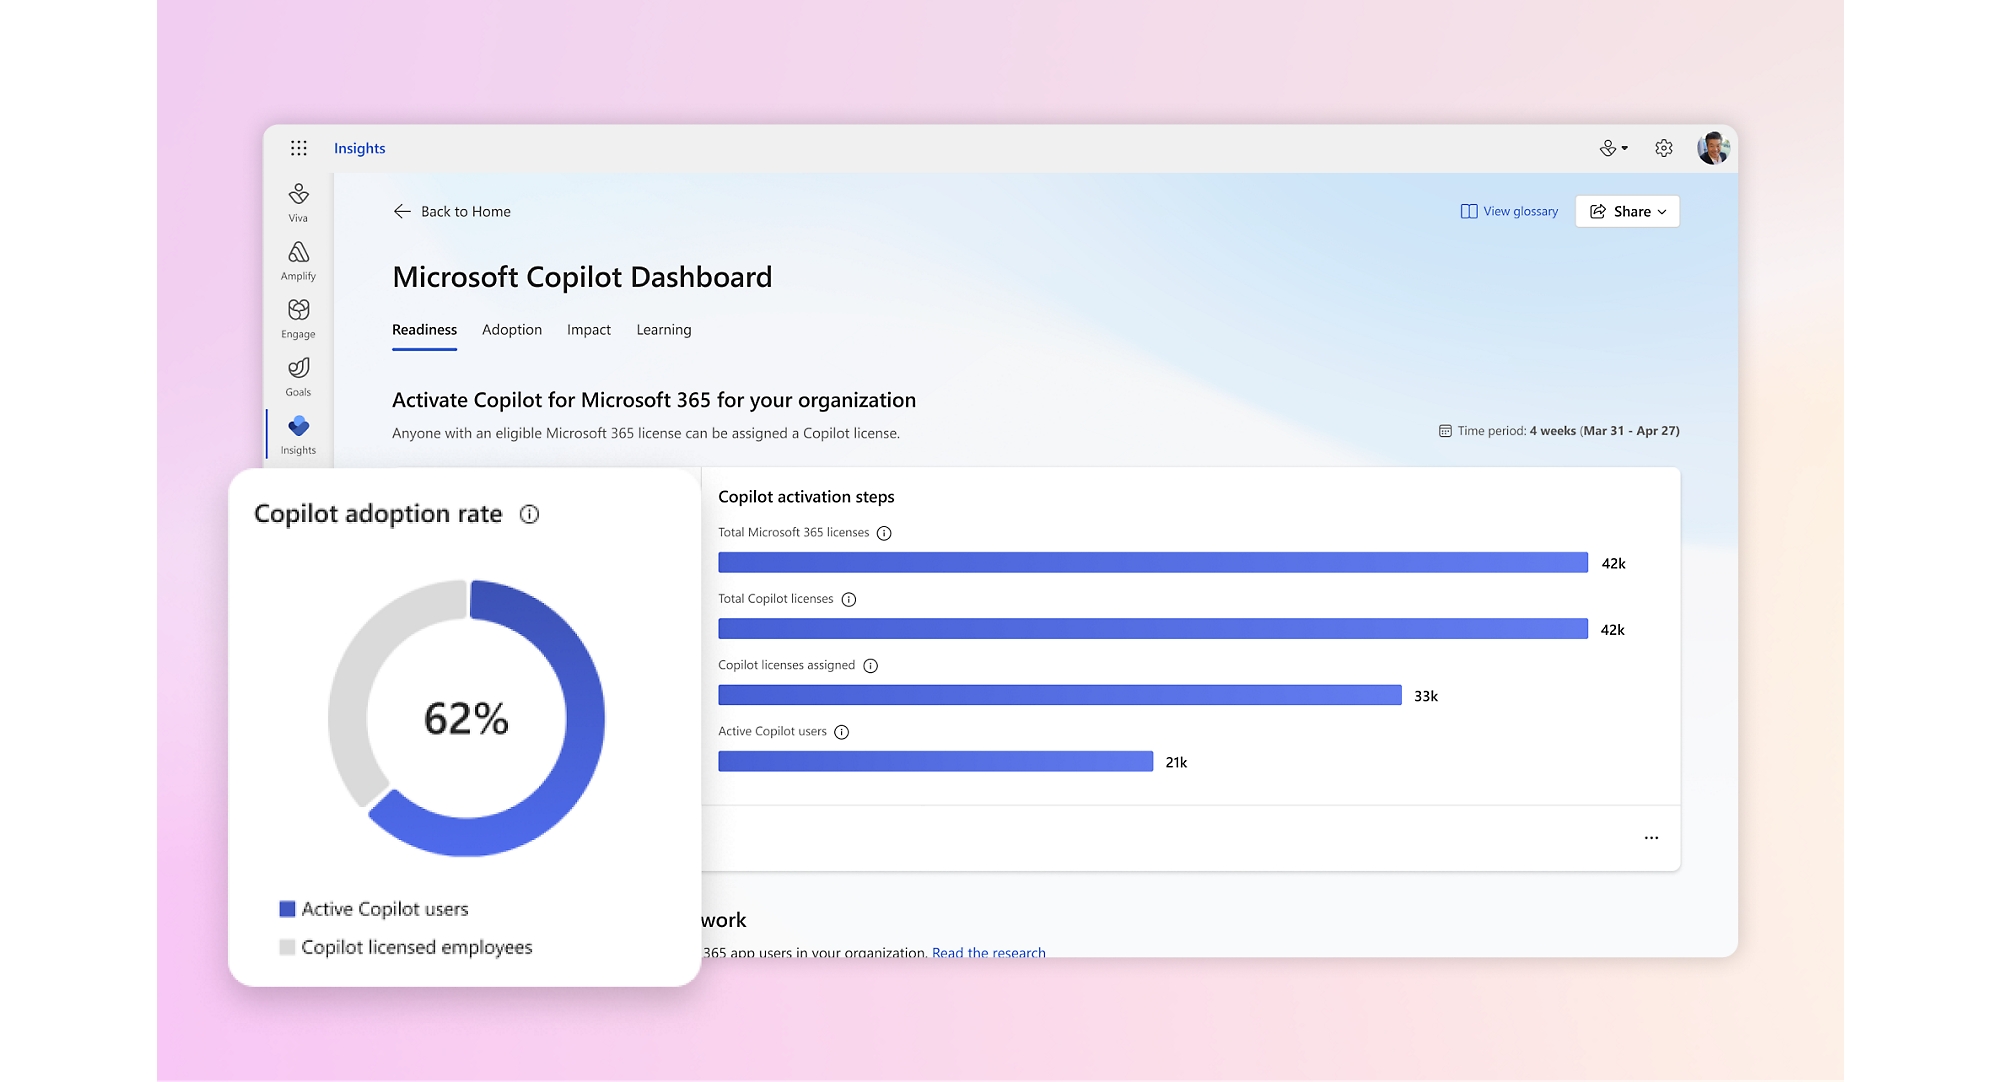 Microsoft Copilot Dashboard showing an adoption rate of 62% and a progress bar chart of Copilot activation steps.